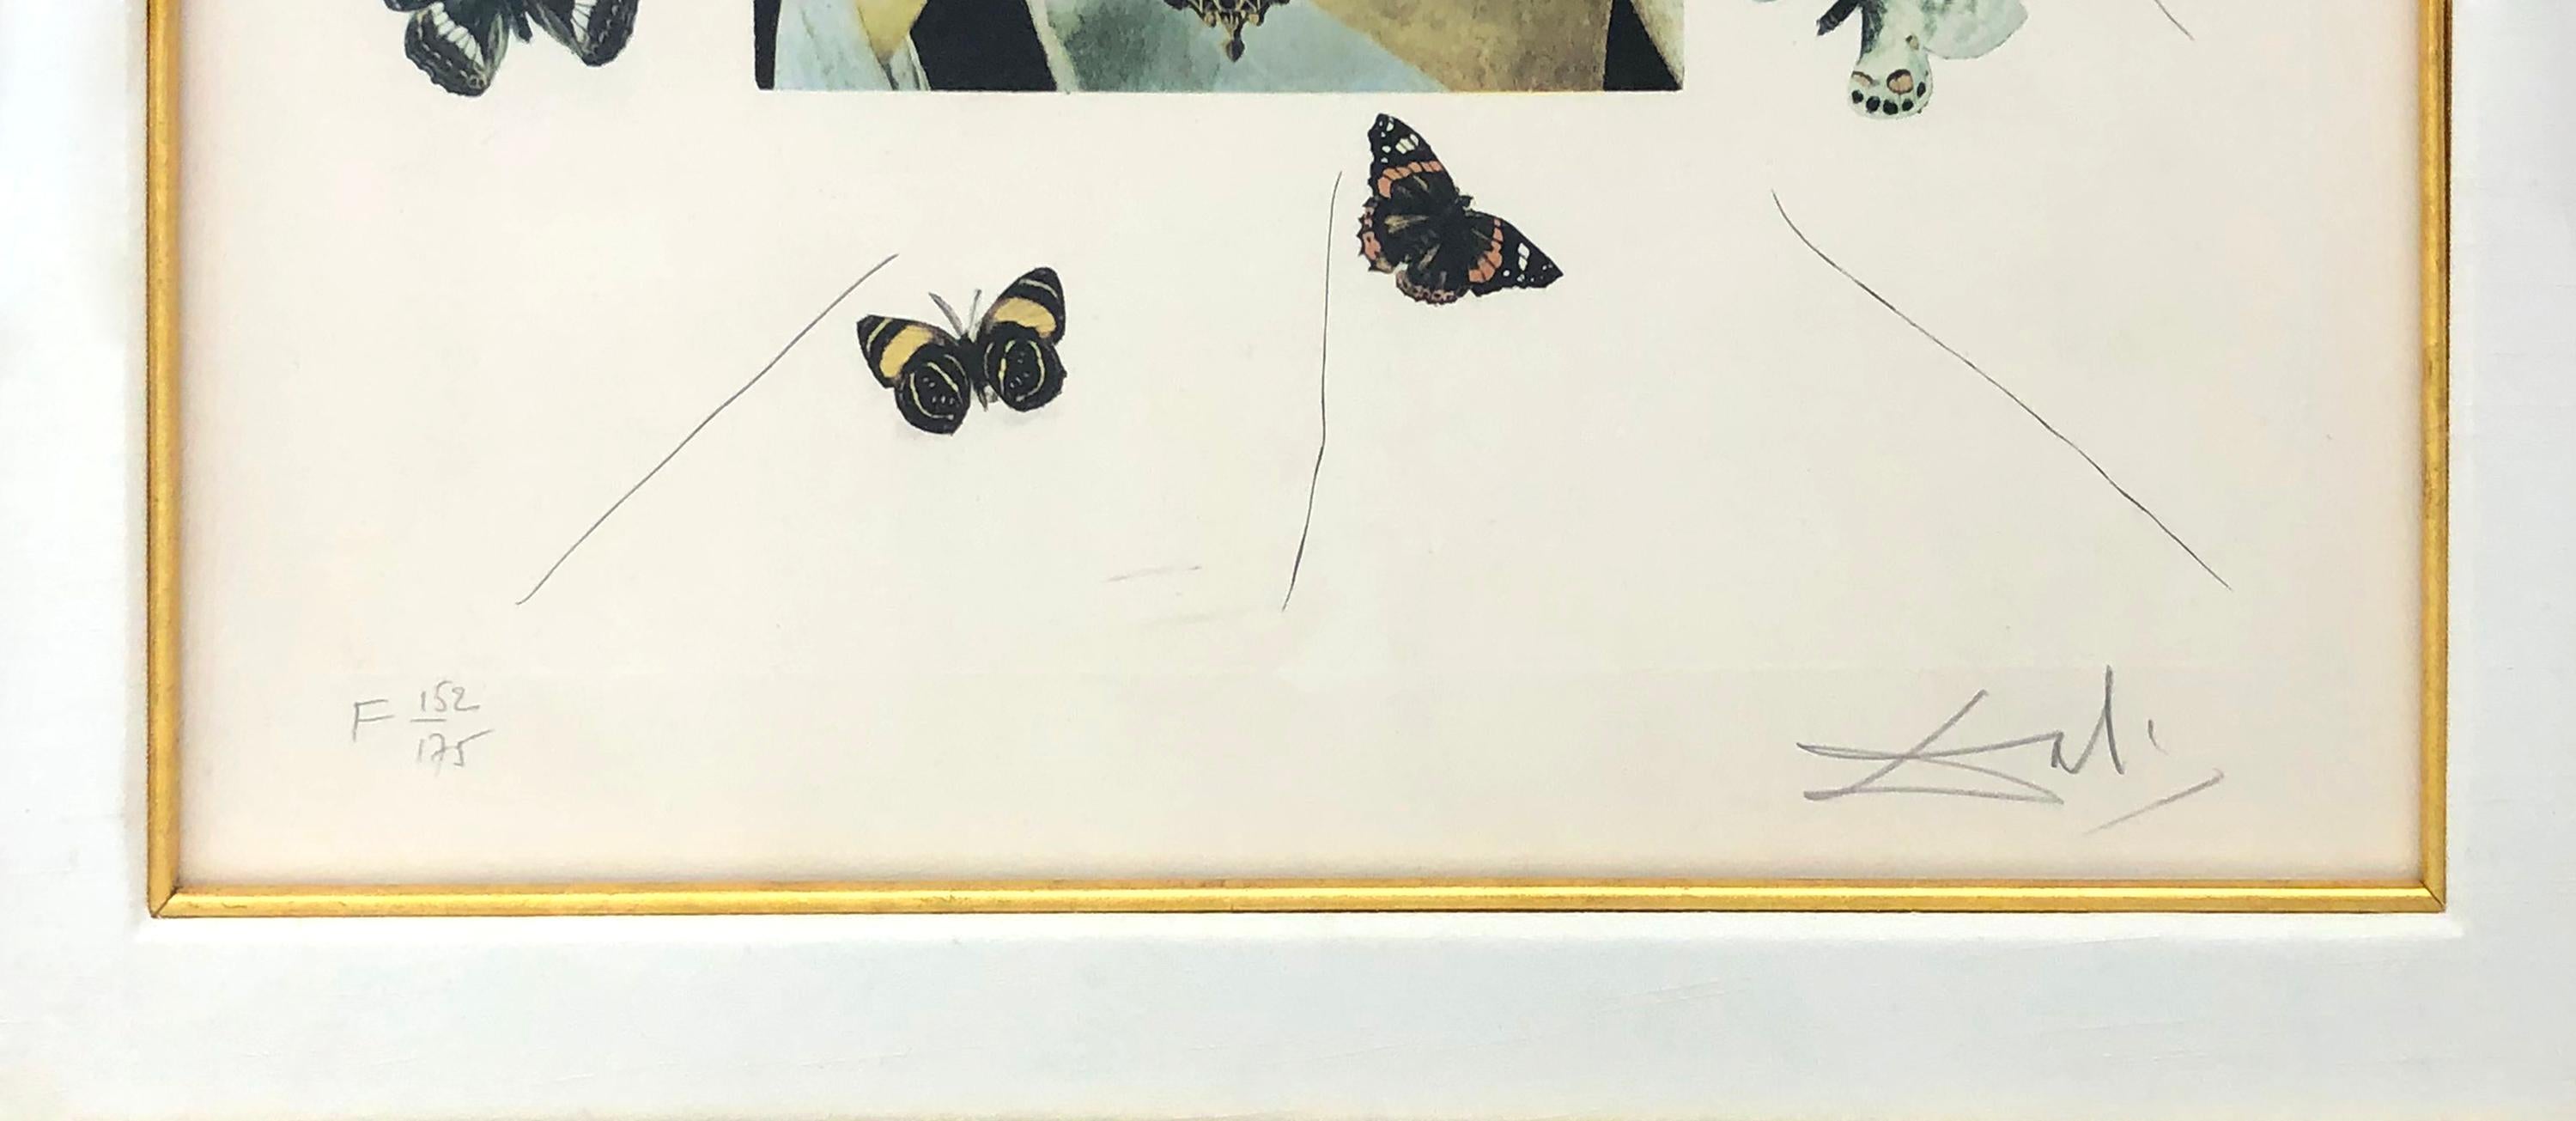 SURREALISTIC PORTRAIT OF DALI SURROUNDED BY BUTTERFLIES - Print by Salvador Dalí